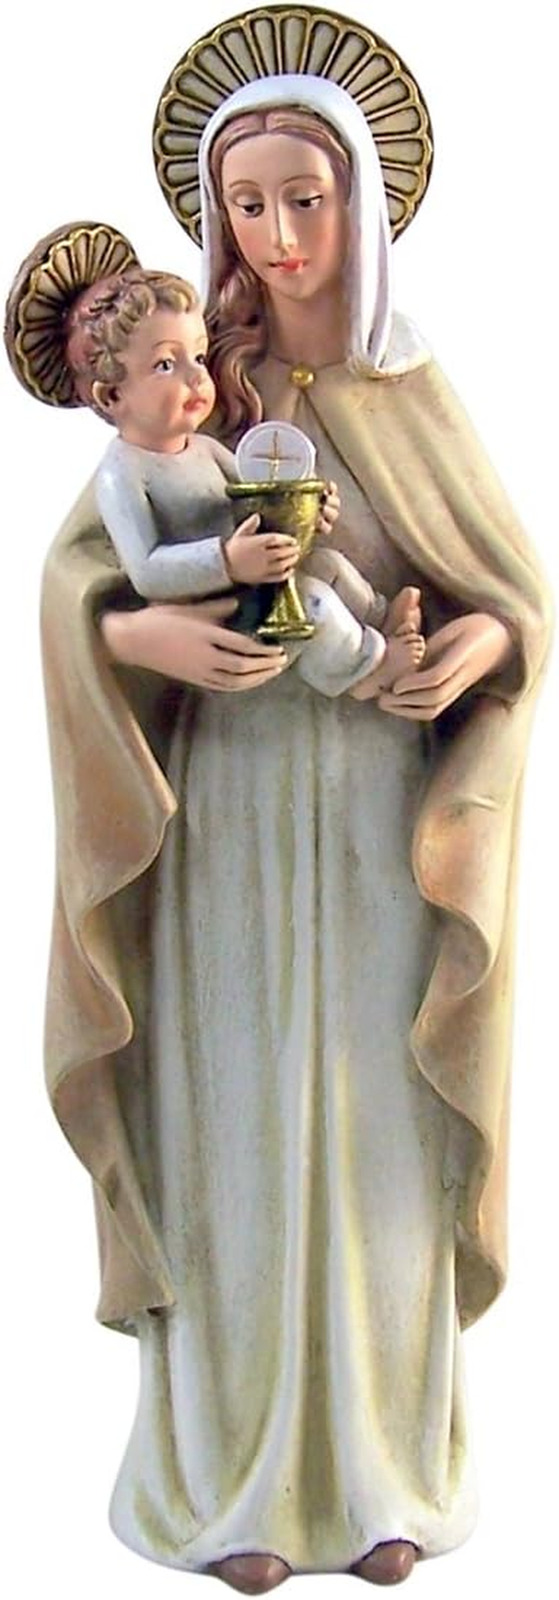 Resin Our Lady of the Blessed Sacrament Figurine Inspired by Sister M.I. , 8 Inc